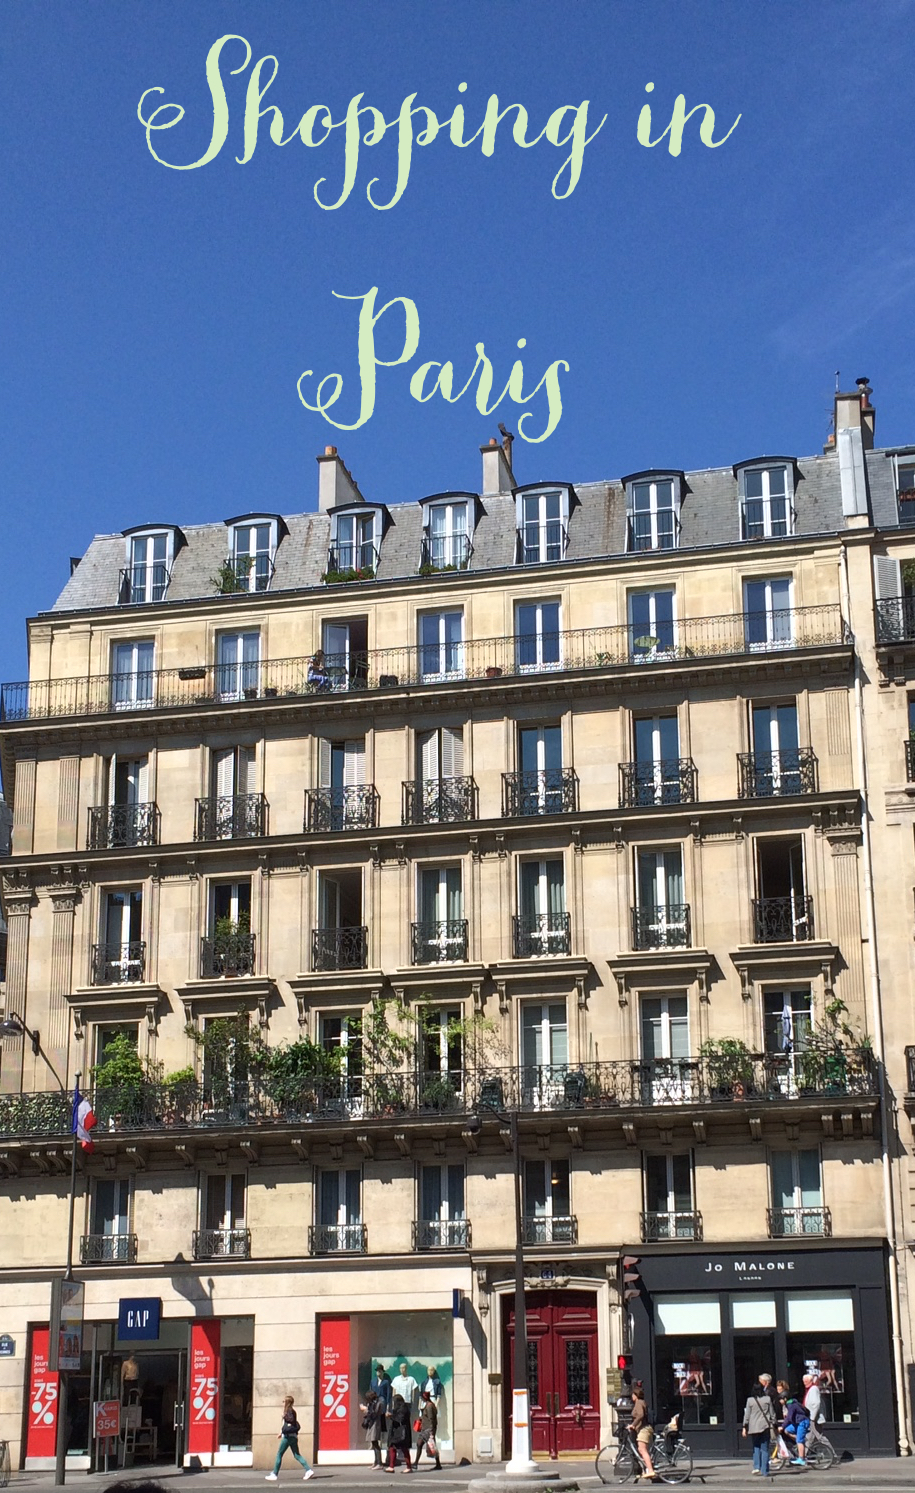 A Guide to Shopping in Paris - My Favorite Shops!